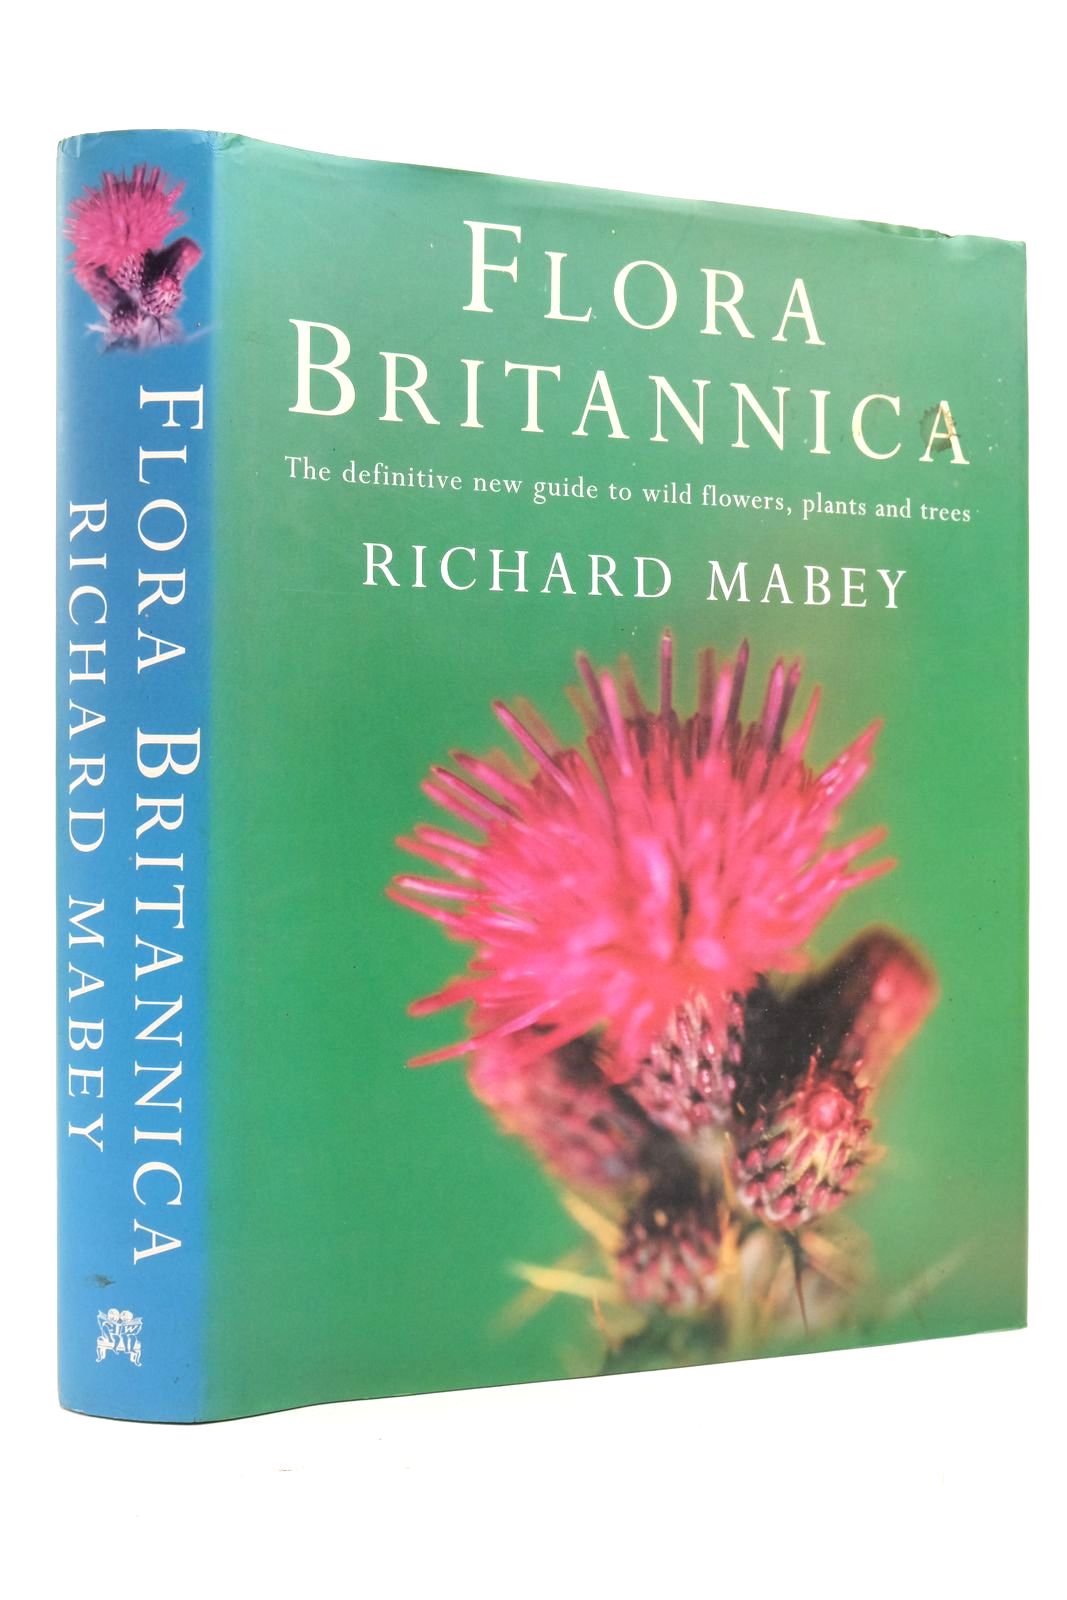 Photo of FLORA BRITANNICA written by Mabey, Richard published by Chatto & Windus (STOCK CODE: 2137988)  for sale by Stella & Rose's Books